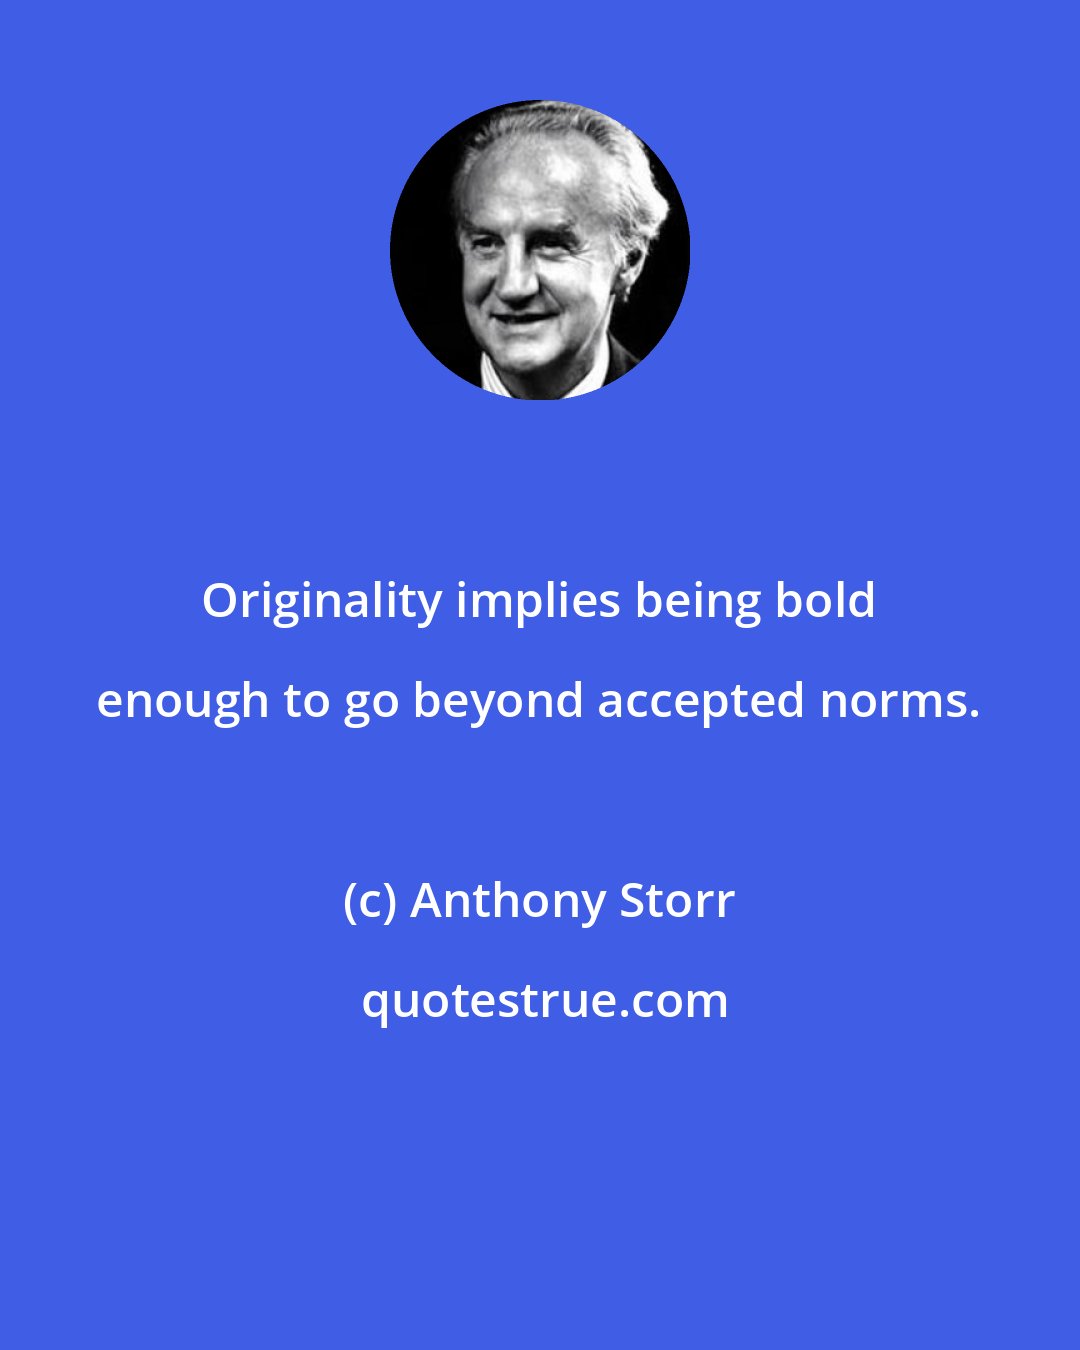 Anthony Storr: Originality implies being bold enough to go beyond accepted norms.